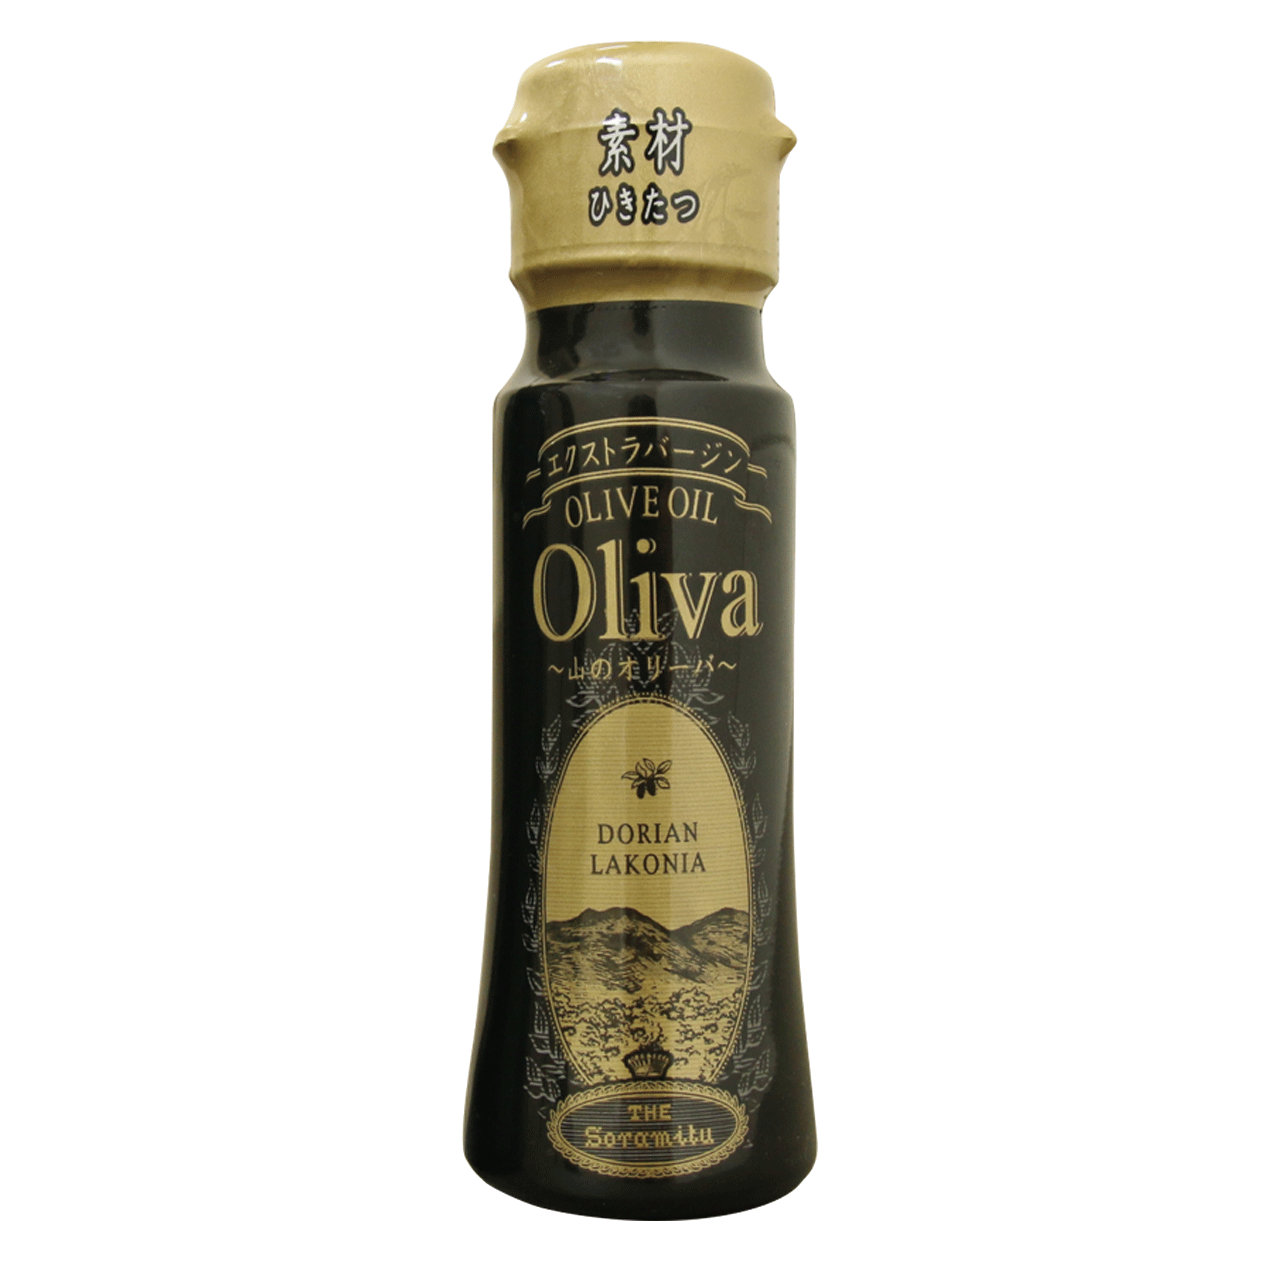 Extra Virgin Olive Oil - EX Mountain Oliva - Fruity sweetness and Rich and Elegant flavor 45g